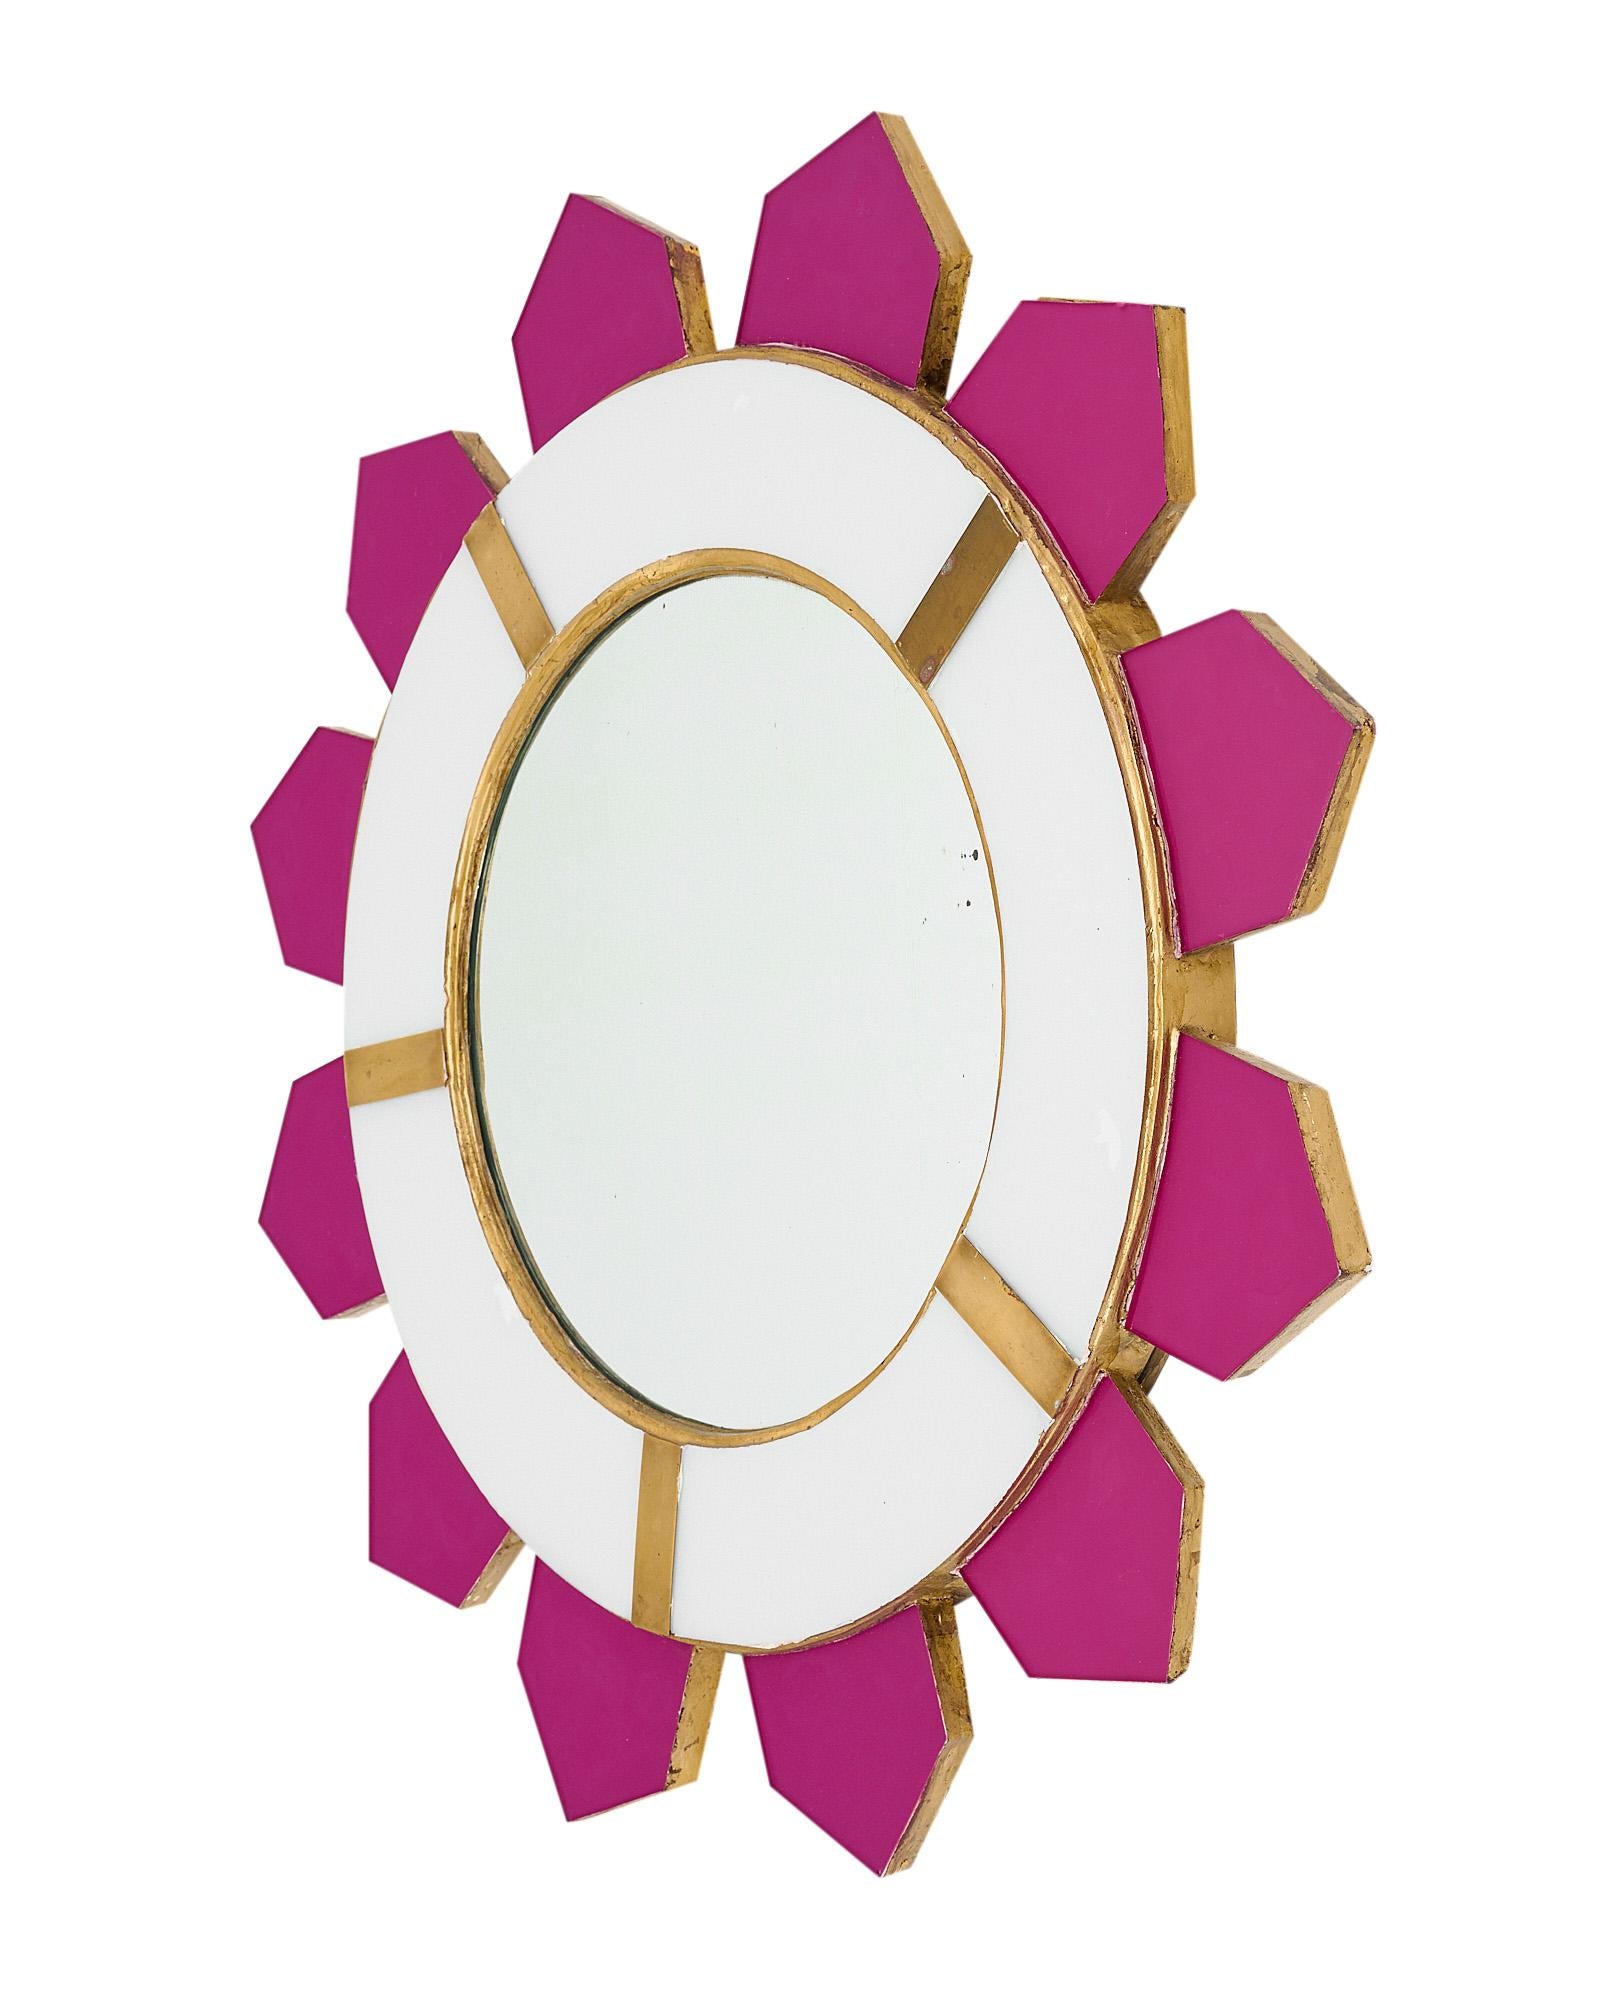 Modernist sunburst with a wooden structure and pink glass veneered rays emanating from a central circular mirror. The central mirror is framed with white glass elements as well as brass décor. We love the strong stylized concept of this piece.
